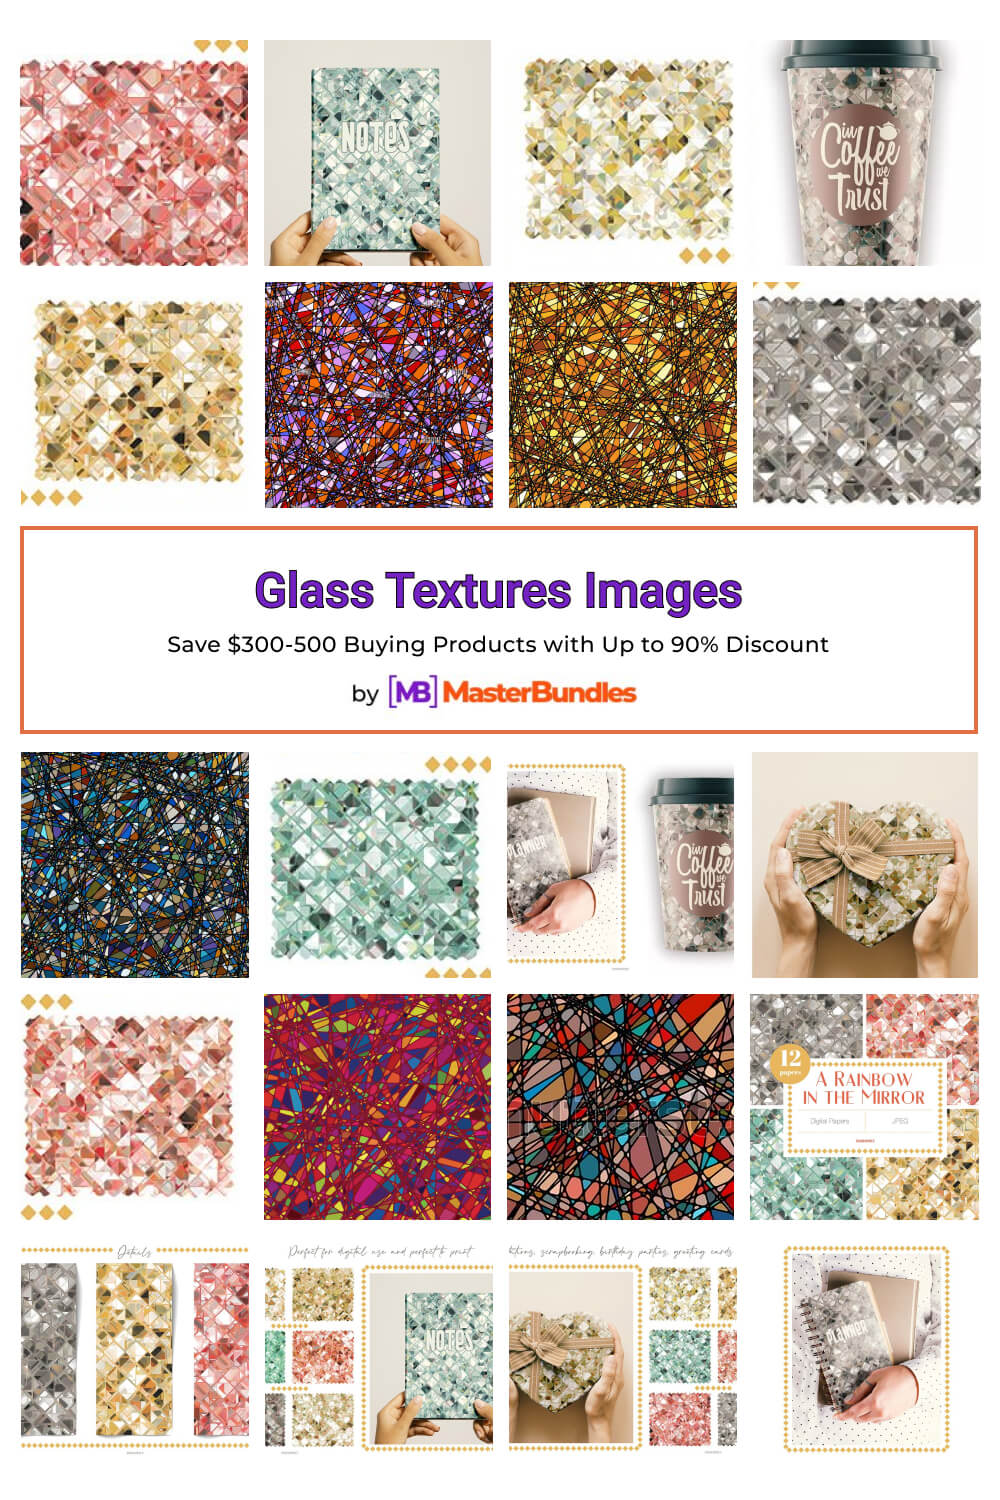 glass textures images pinterest image.